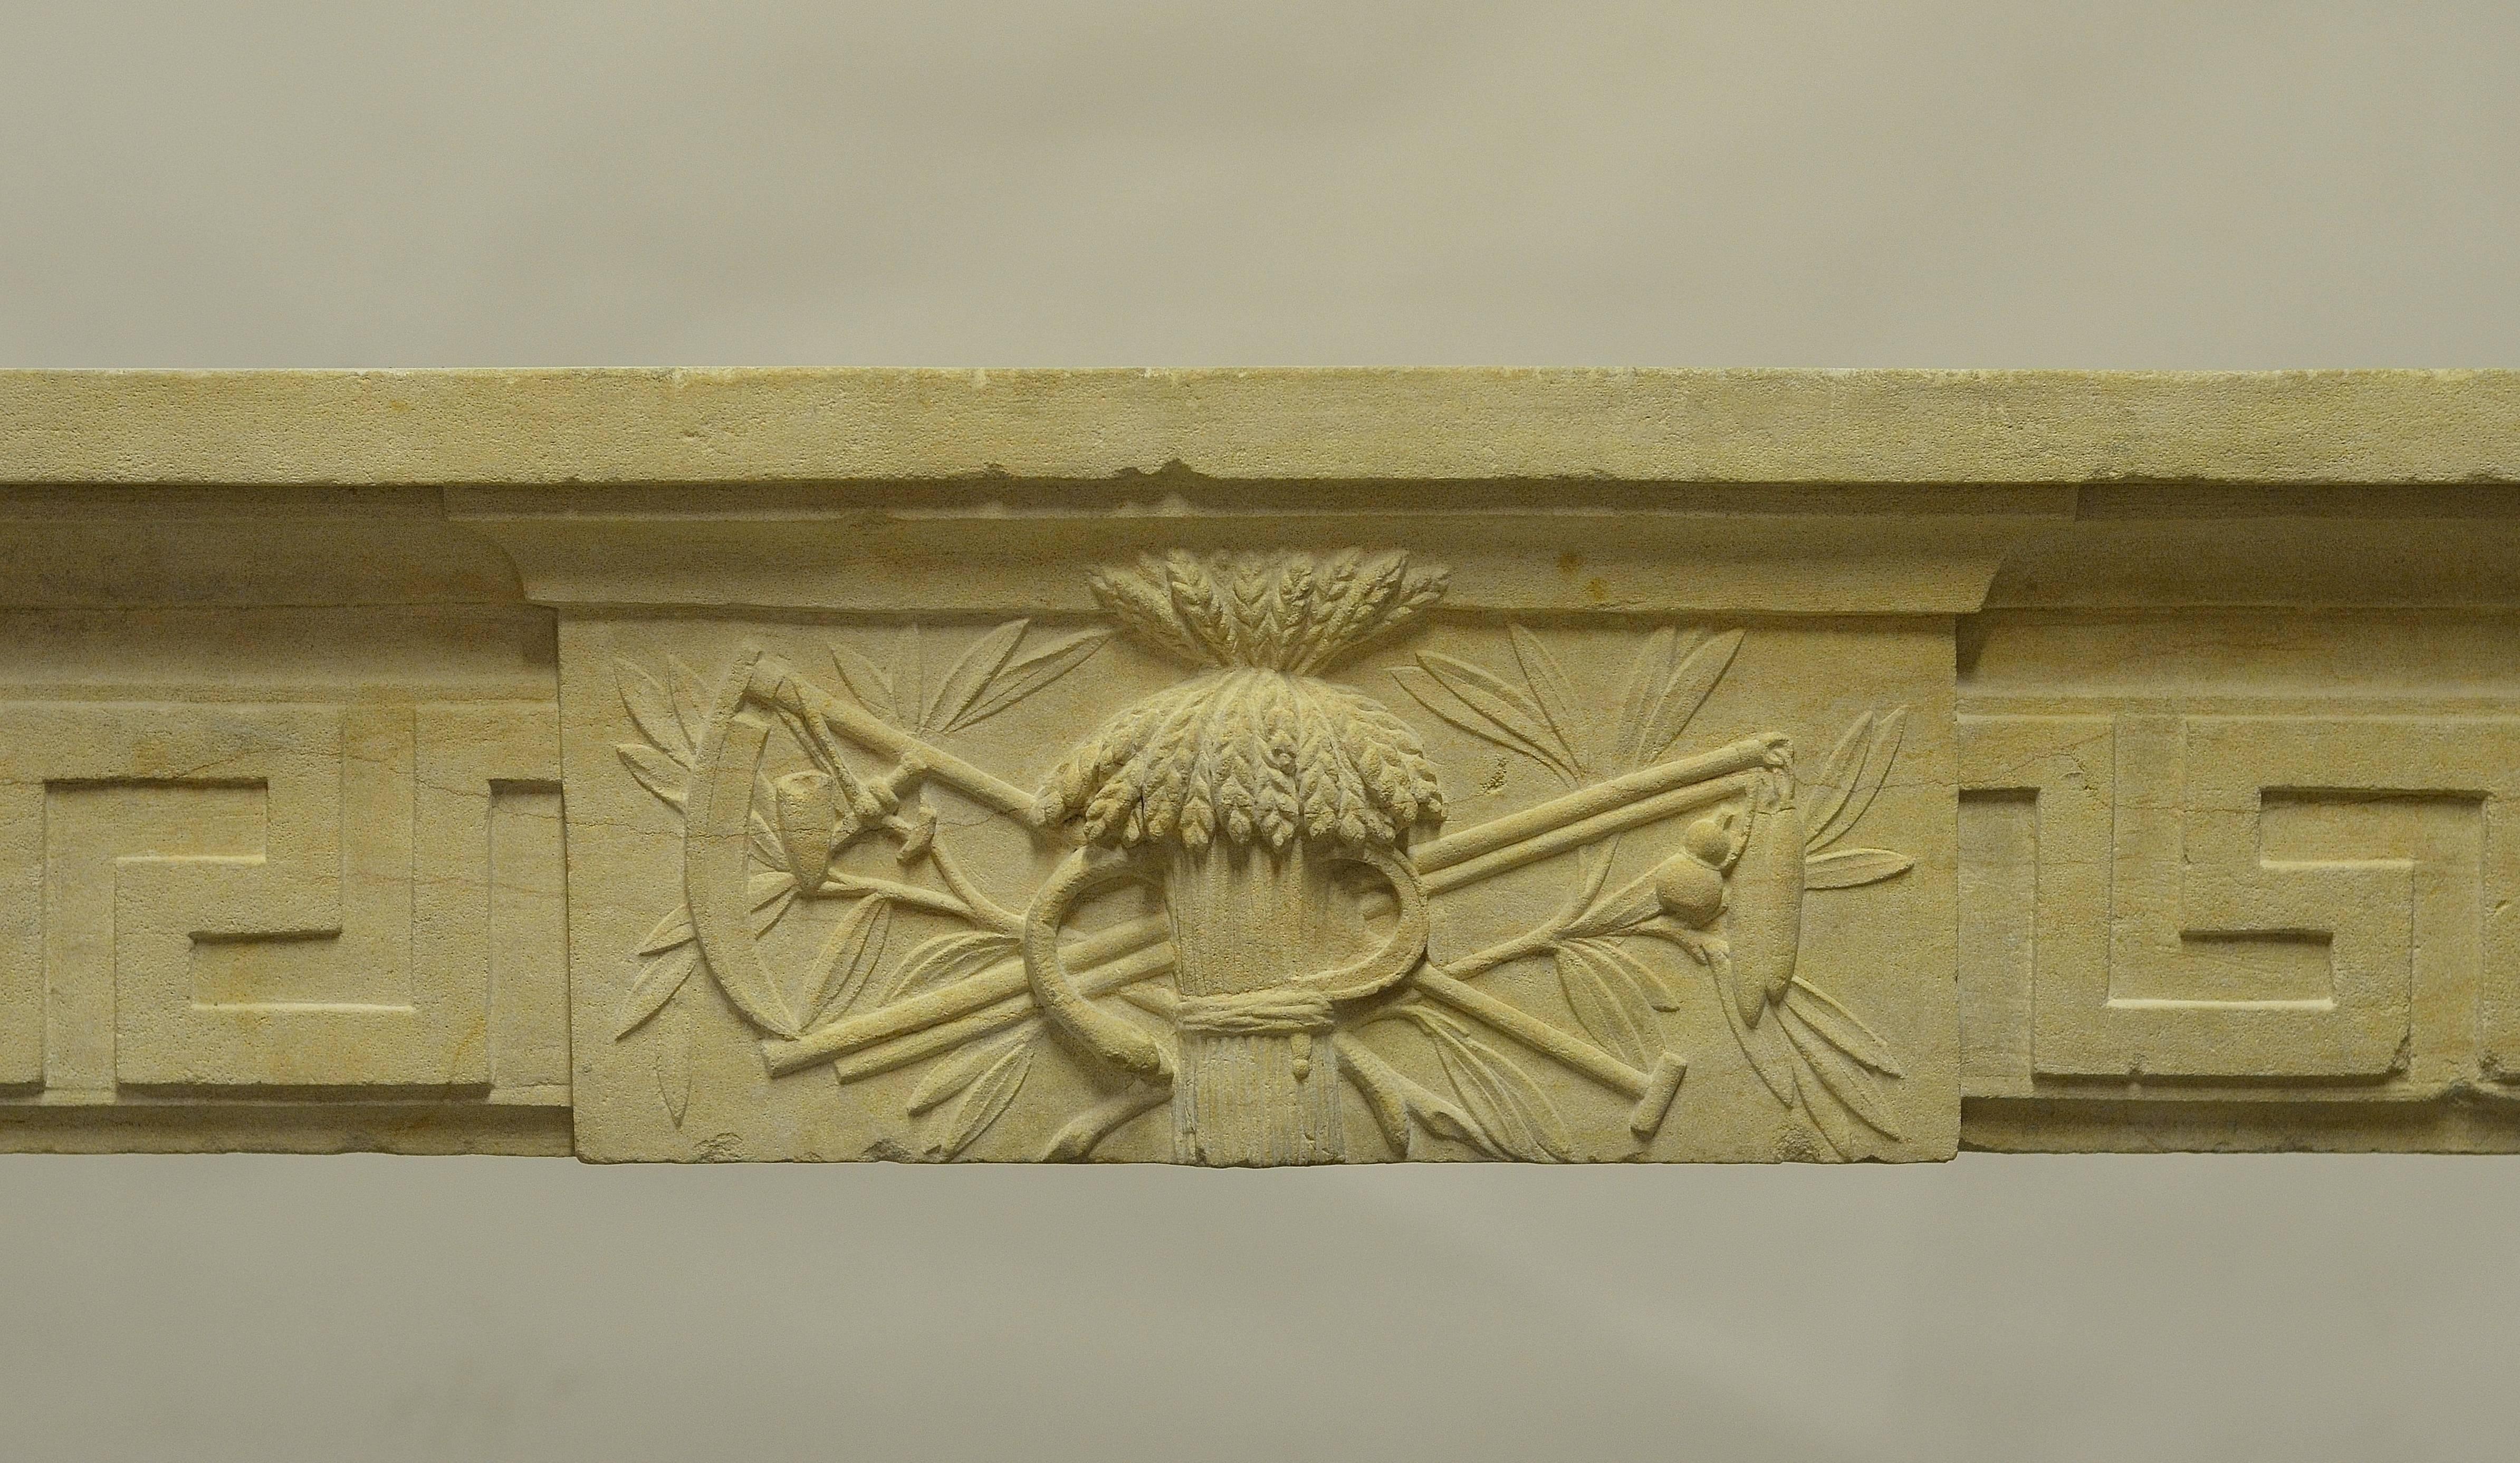 Perfect sized French Louis XVI Fireplace in warm colored Limestone.
Great depth for refurbishing you hearth.

Very decorative, original mantelpiece.
